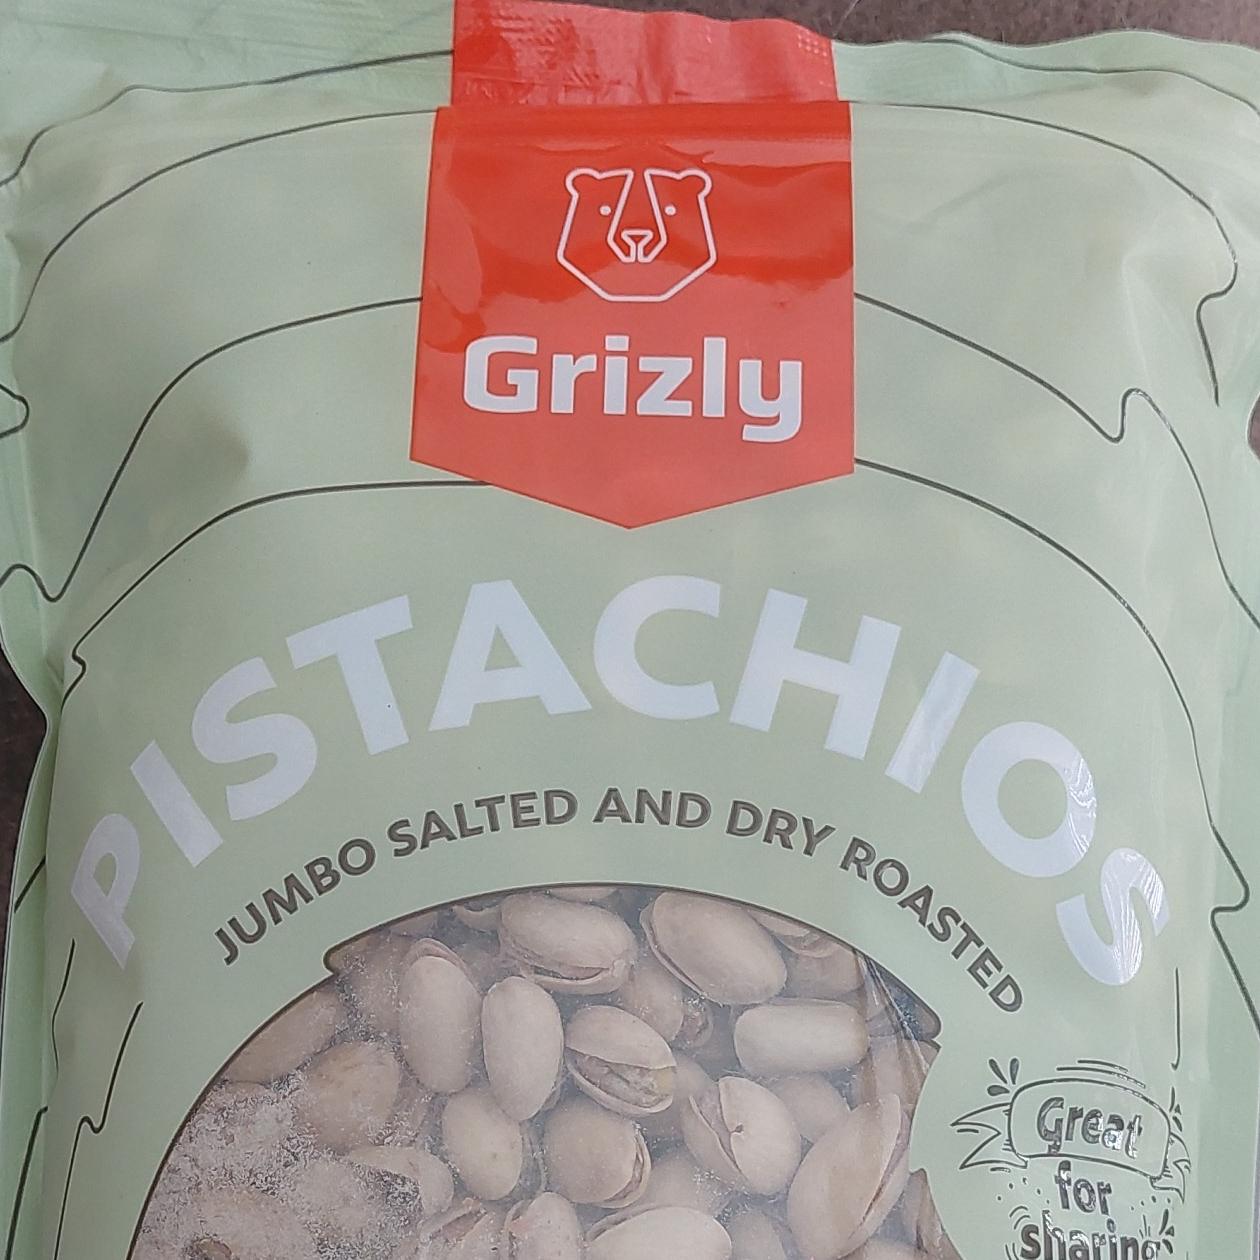 Képek - Pistachios jumbo salted and dry roasted Grizly